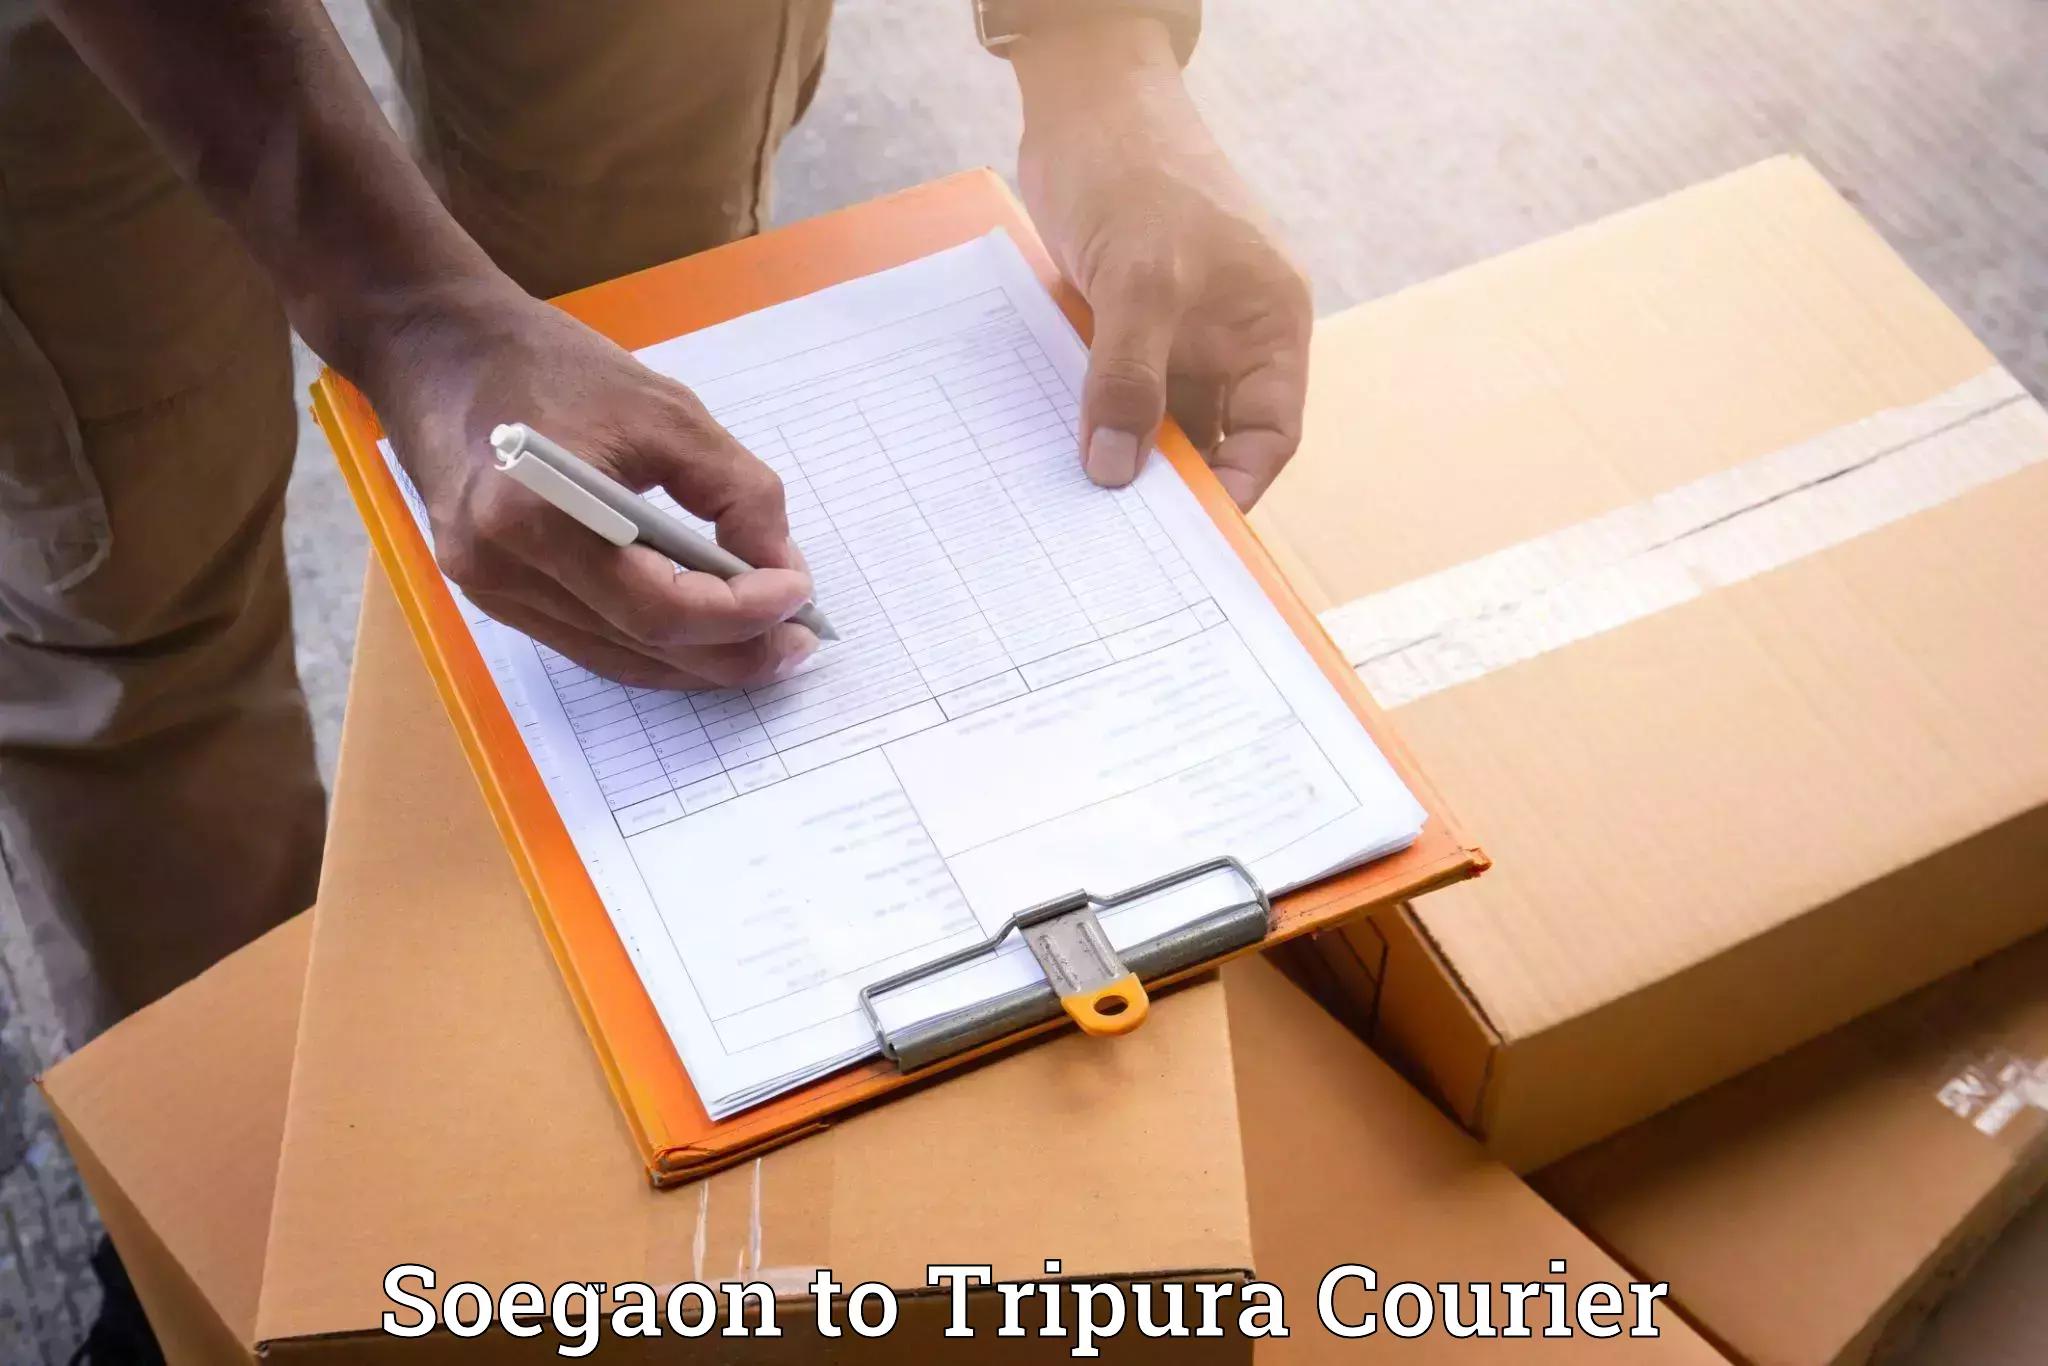 Trusted relocation experts Soegaon to Tripura